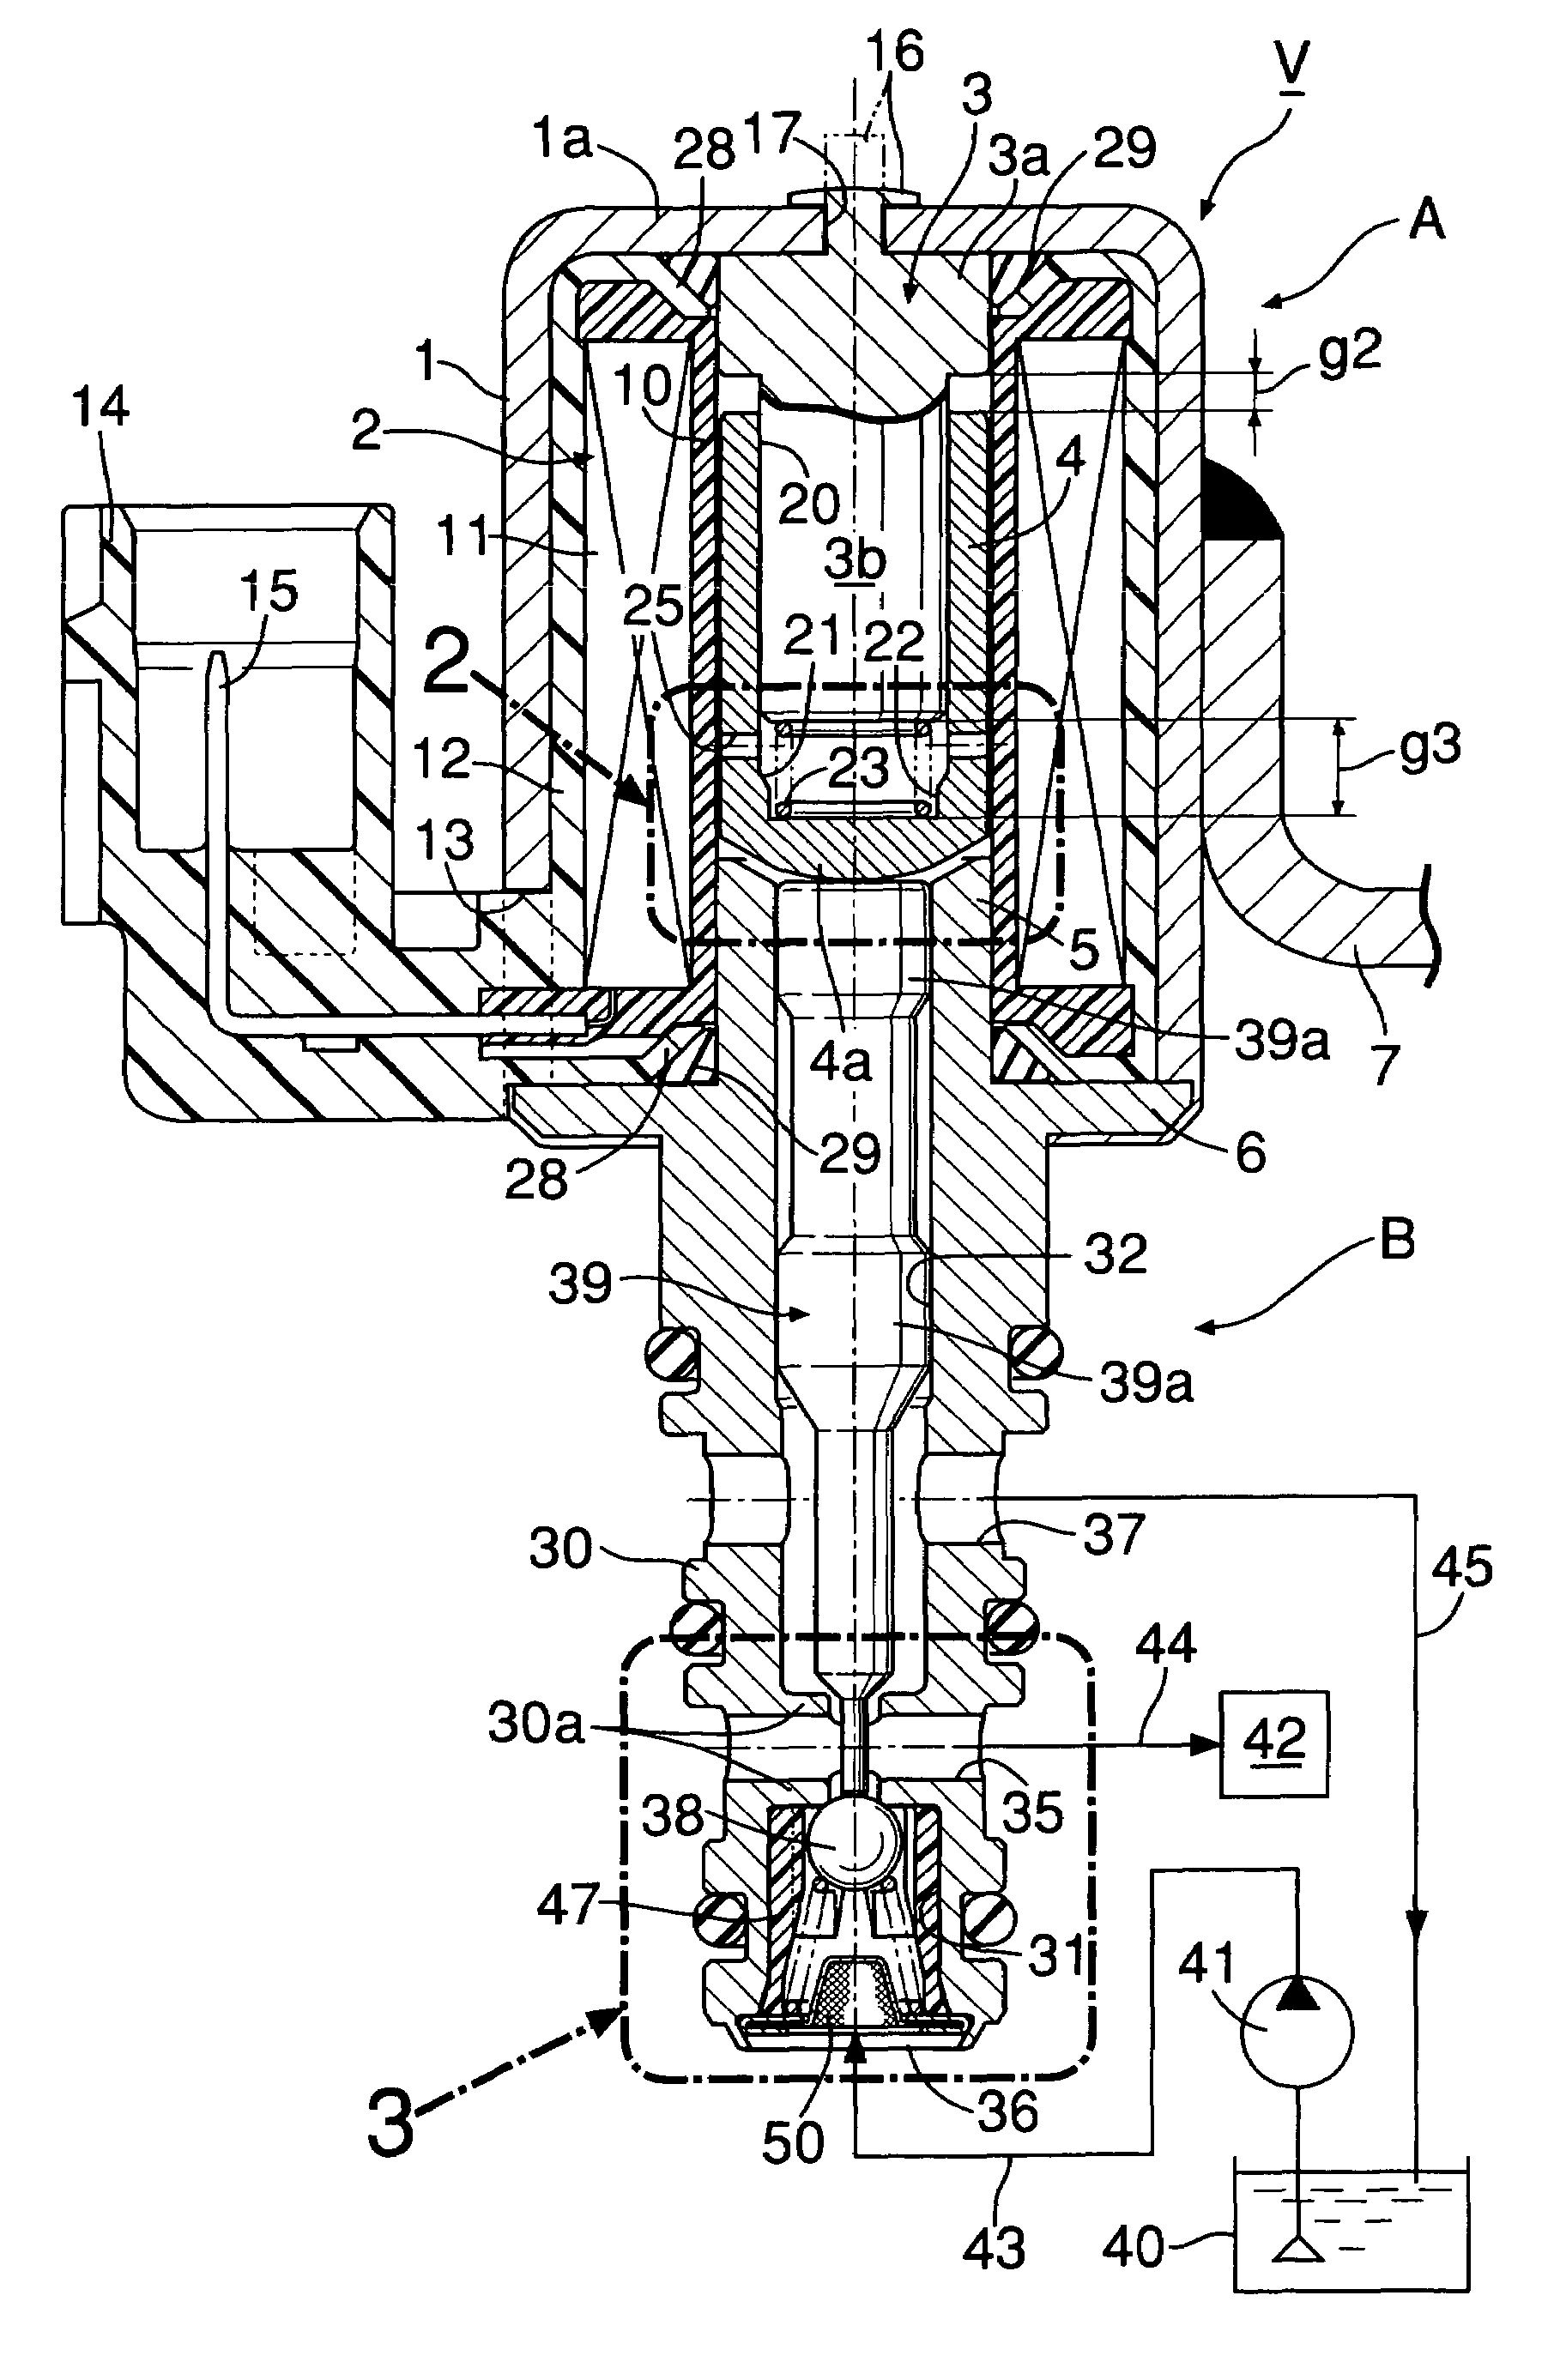 Solenoid valve with cylindrical valve guide for the spherical valve element at the pressure inlet